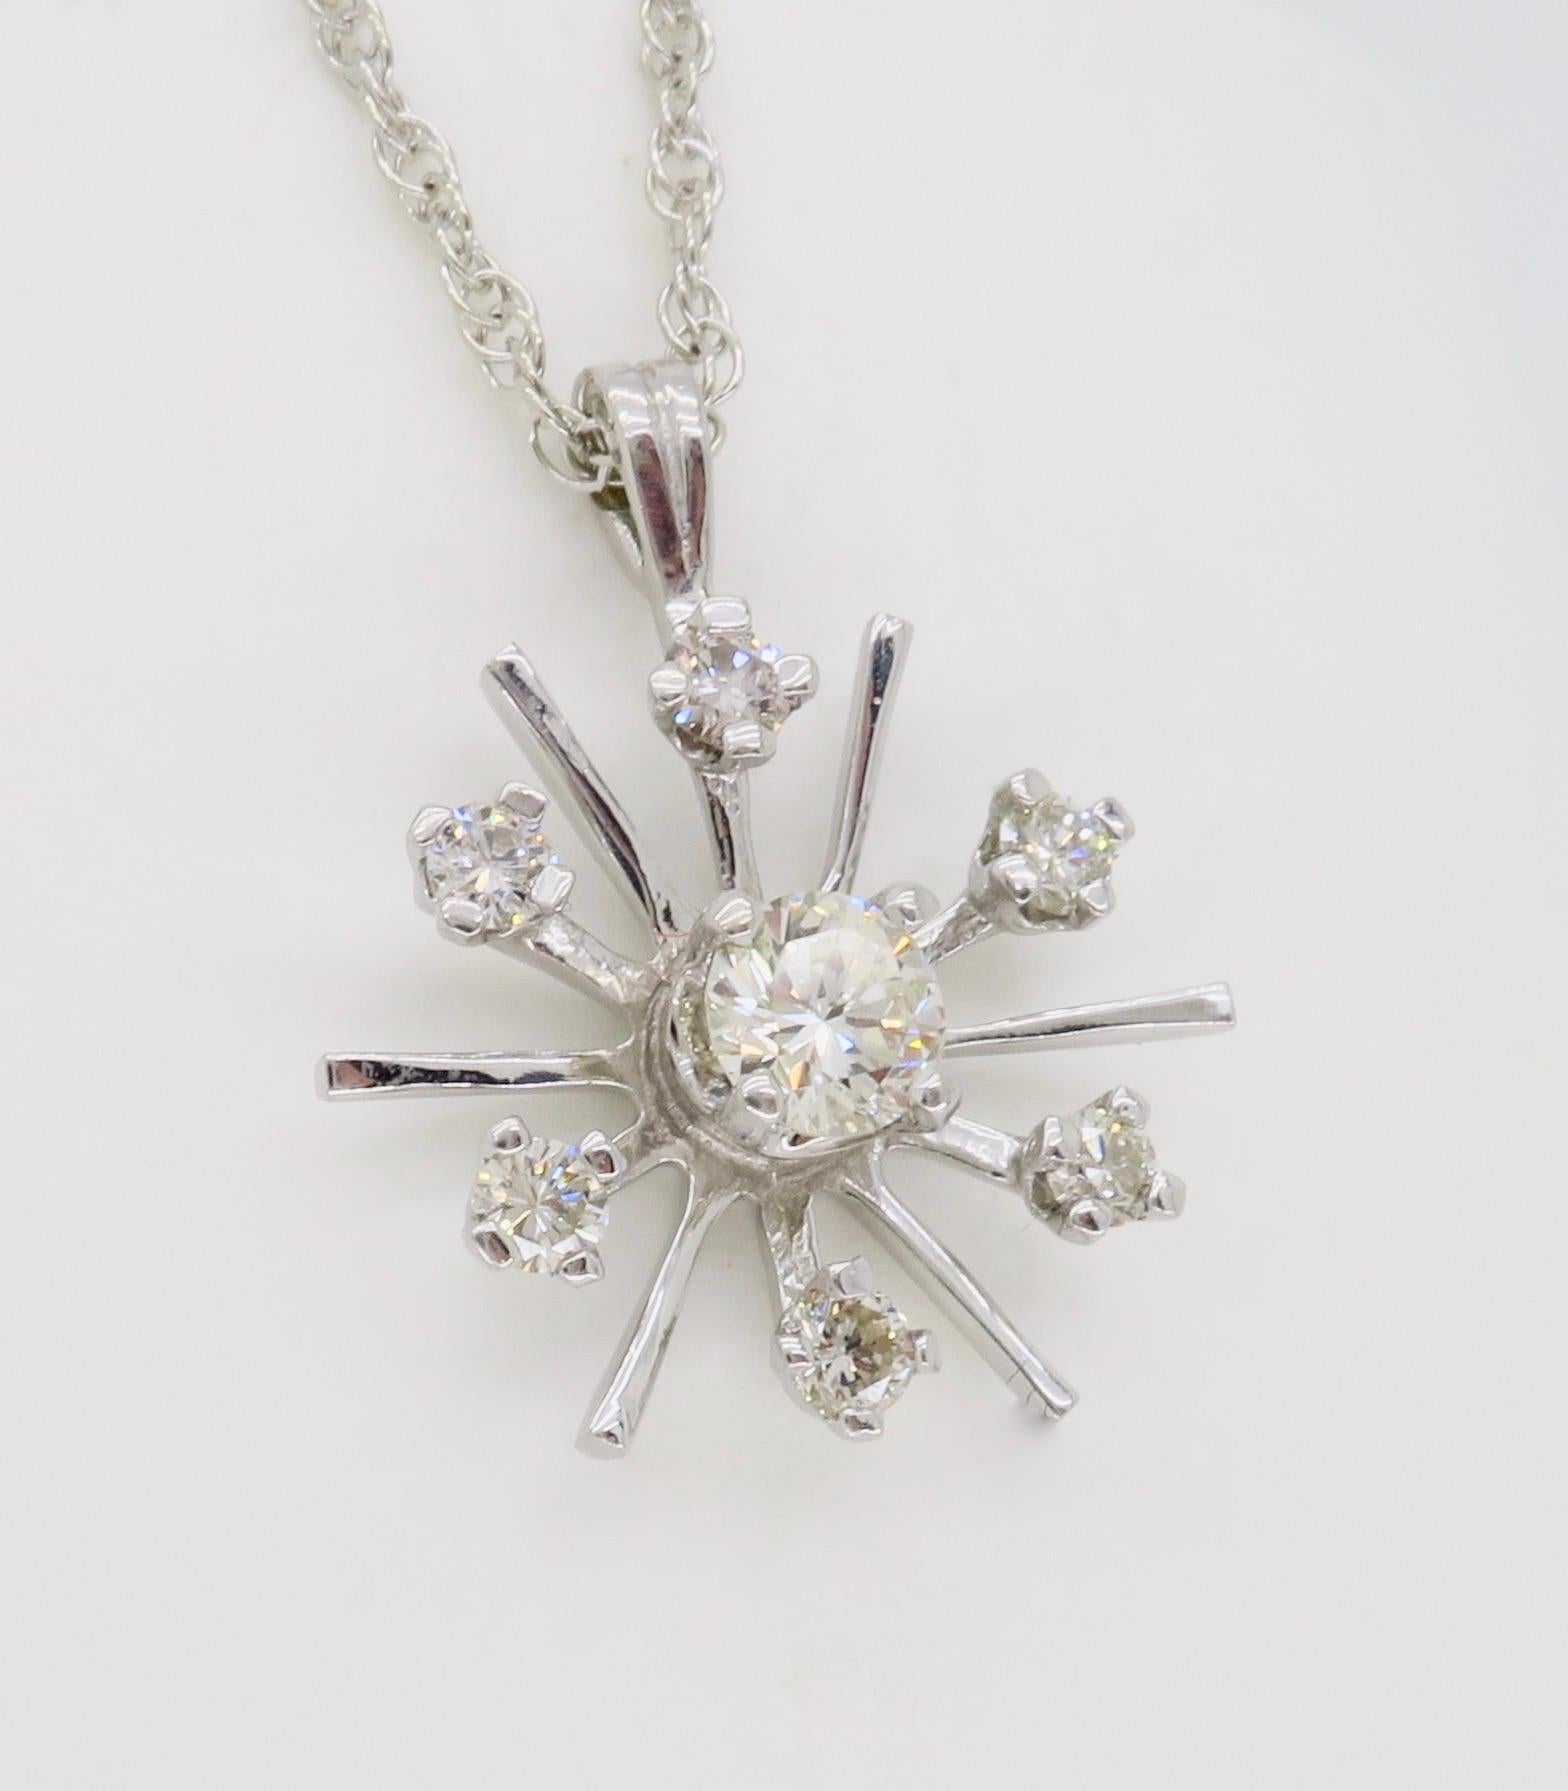 Starburst diamond pendant necklace made in 14k white gold.

Diamond Carat Weight: Approximately .50CTW
Diamond Cut: Round Brilliant Cut Diamond
Metal: 14K White Gold
Chain Length: 17.5” Long
Marked/Tested: Stamped “14K